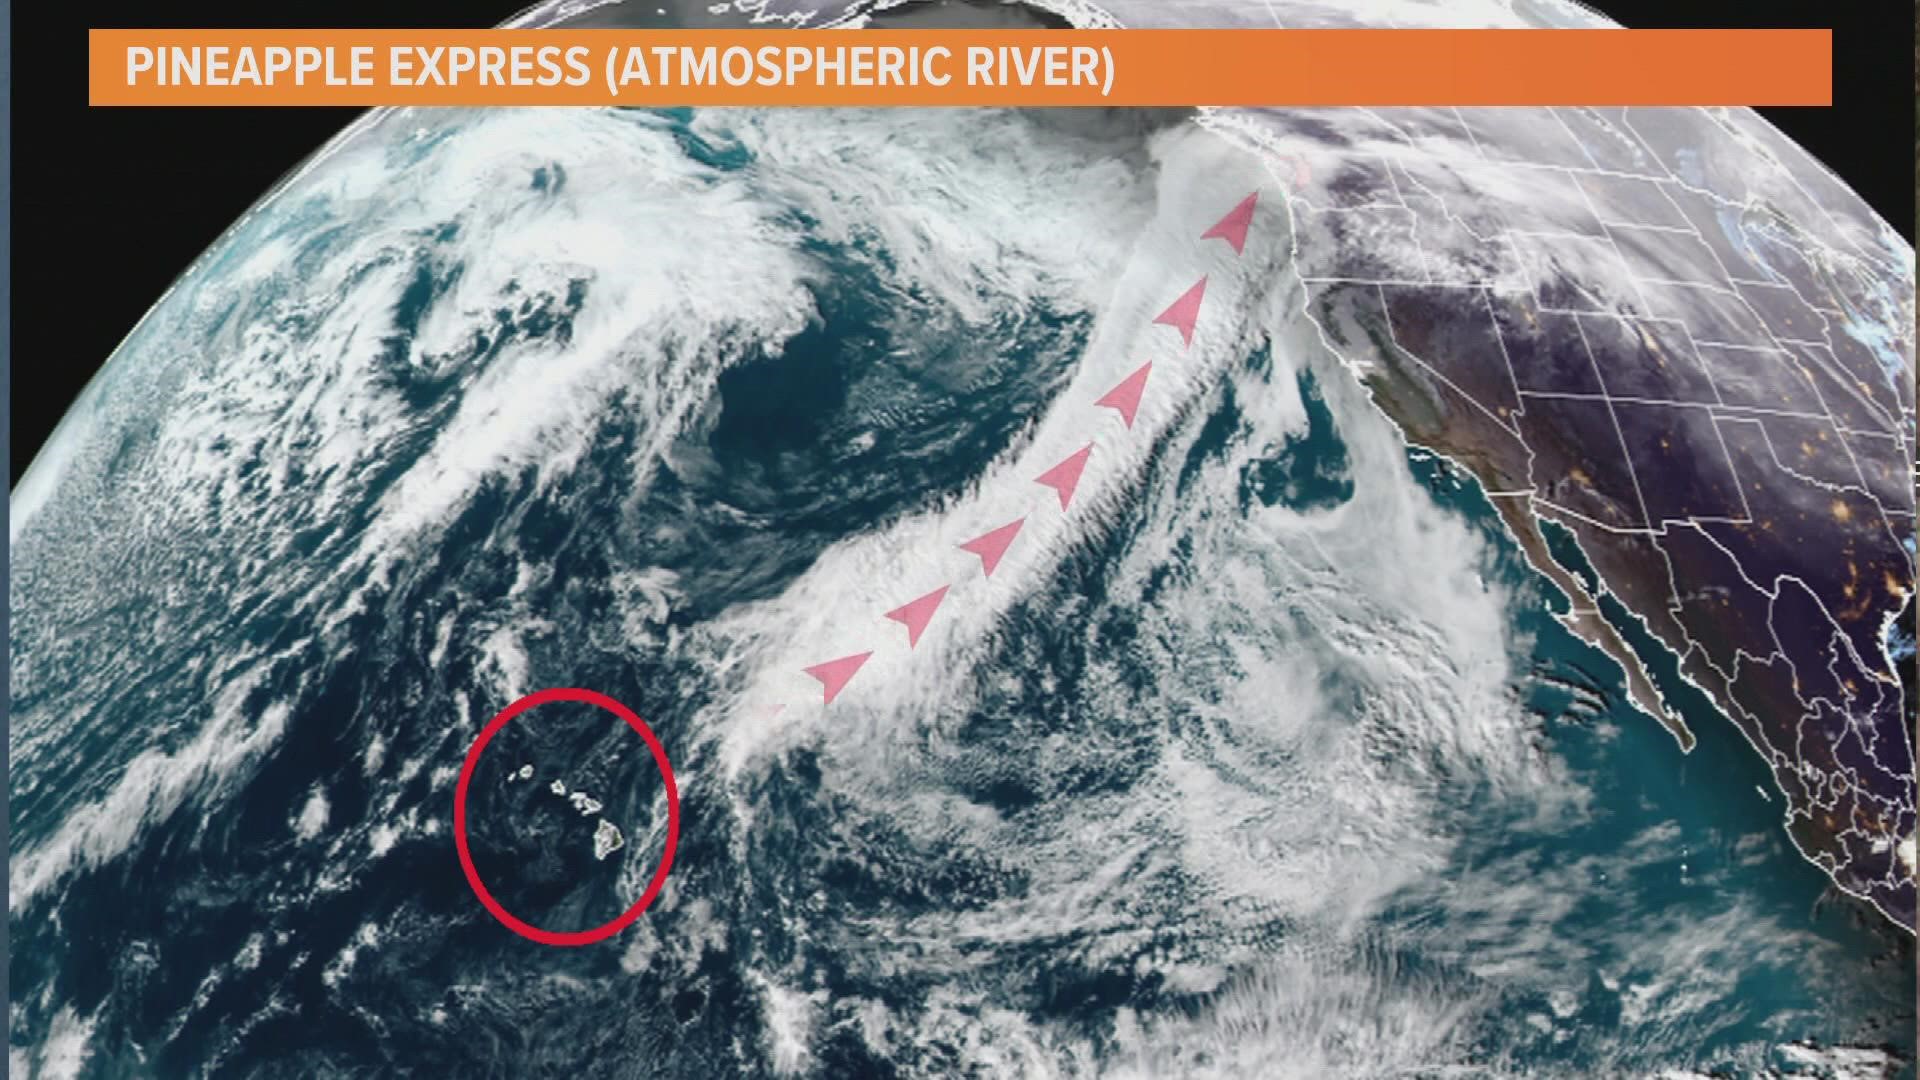 Atmospheric river is a newer name for a familiar weather pattern in the Pacific Northwest called a “Pineapple Express.”